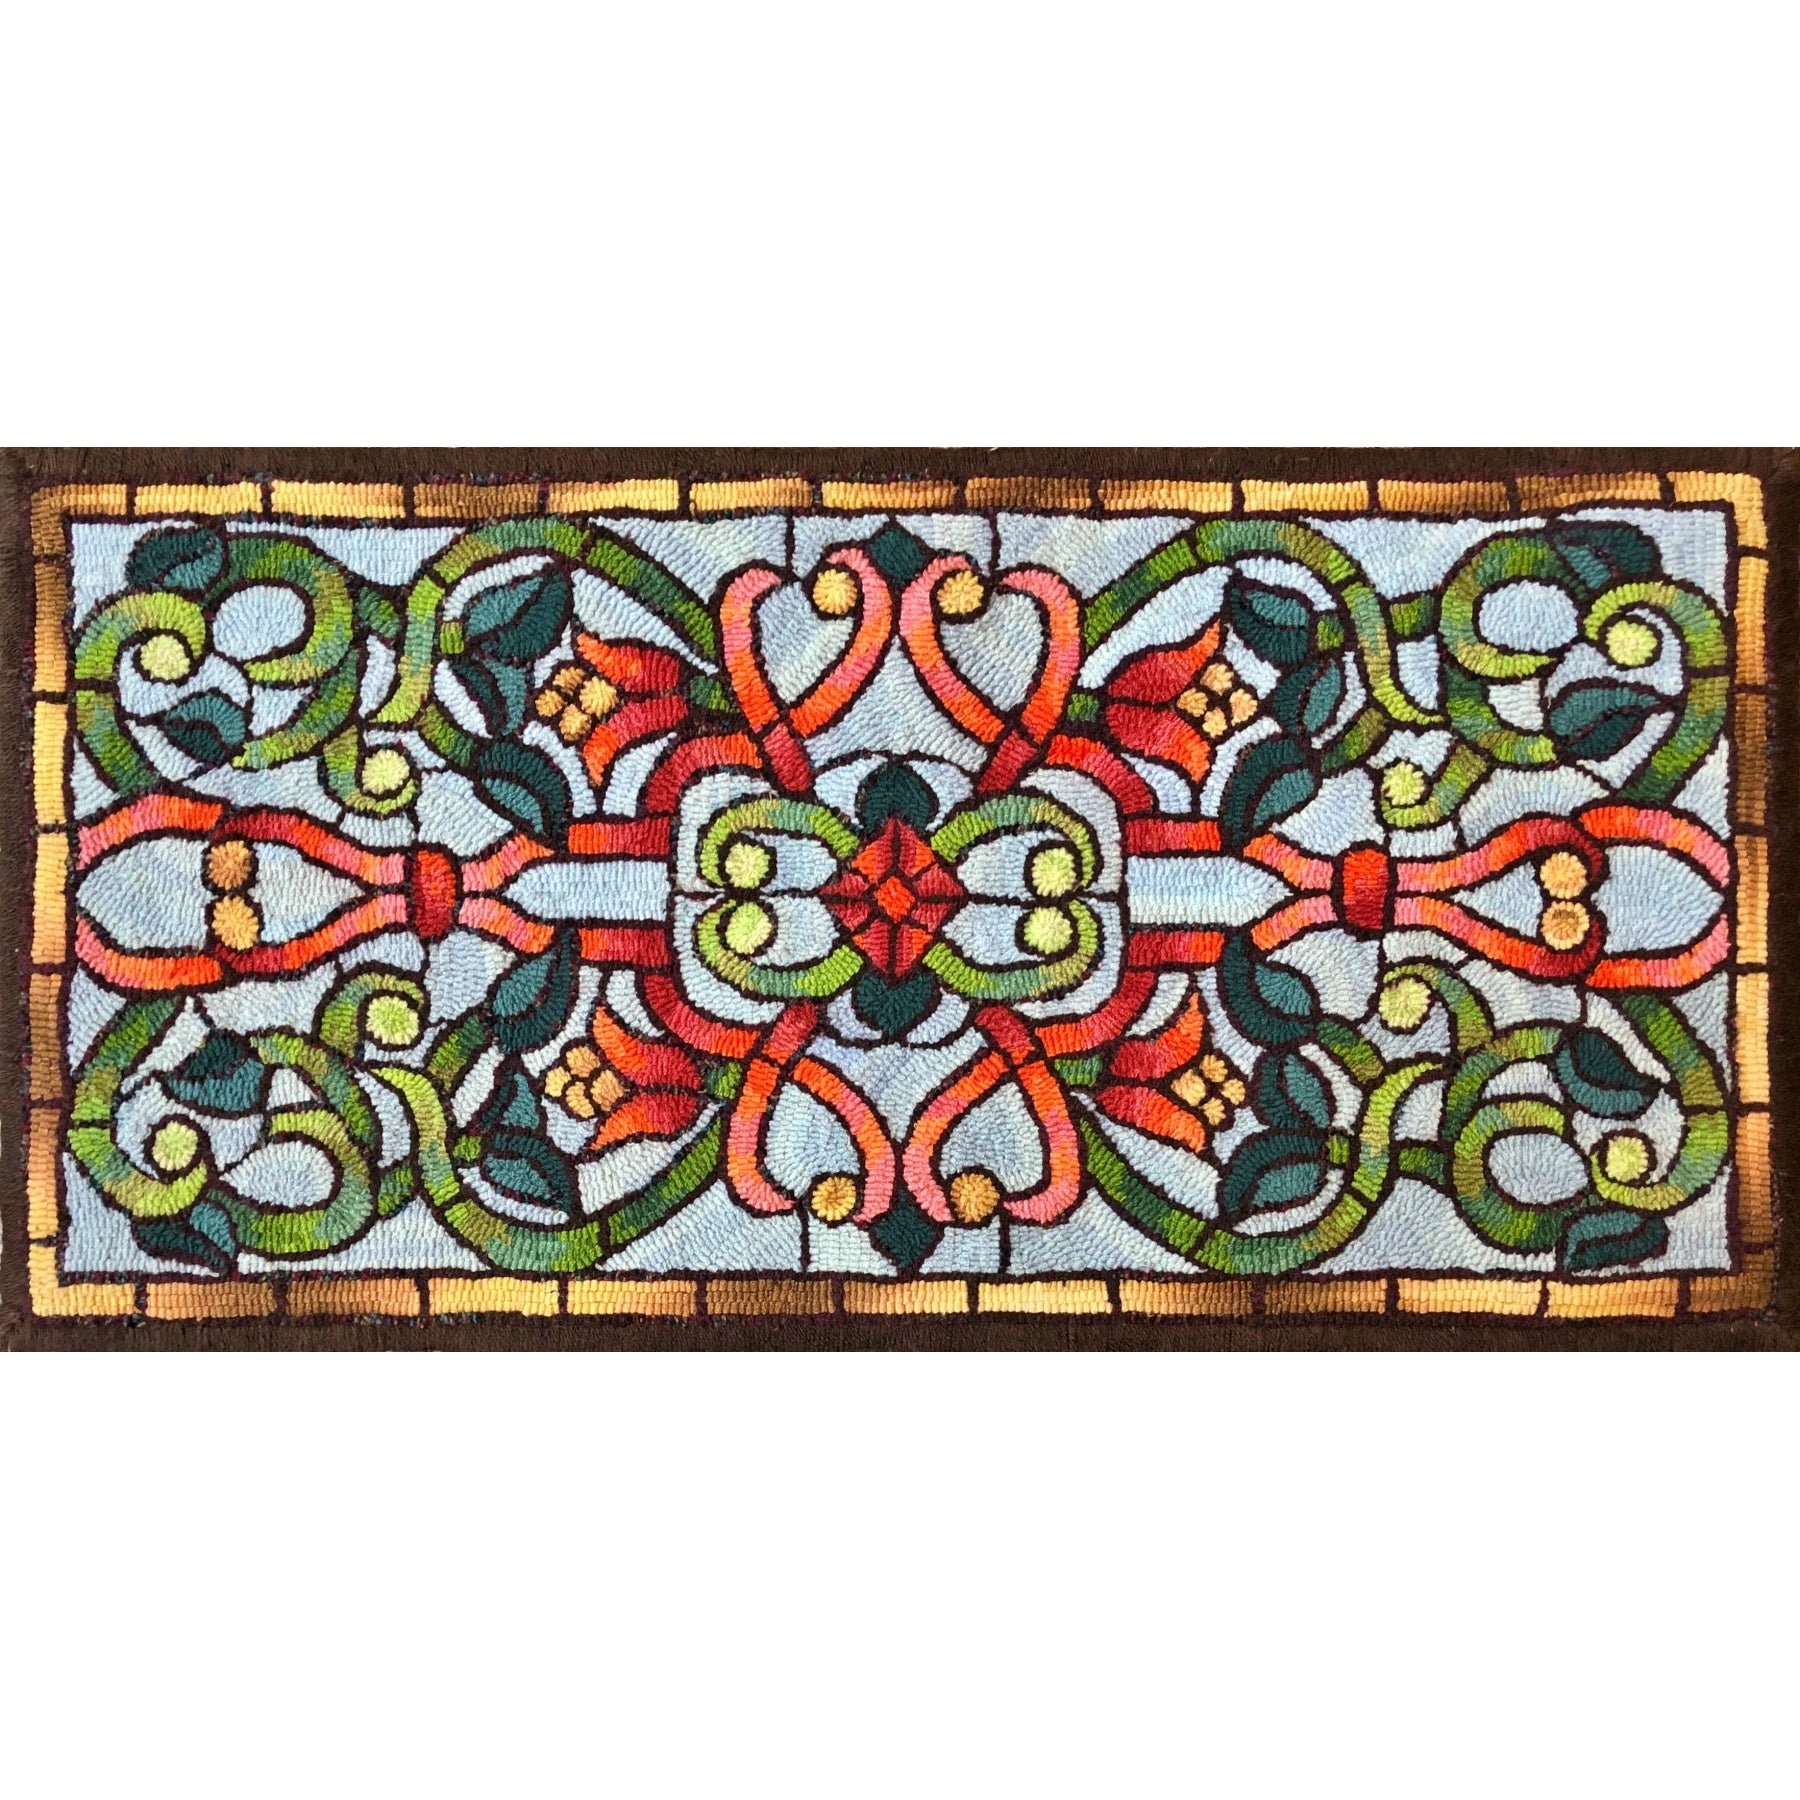 Stained Glass Bench, rug hooked by Melody Lavy